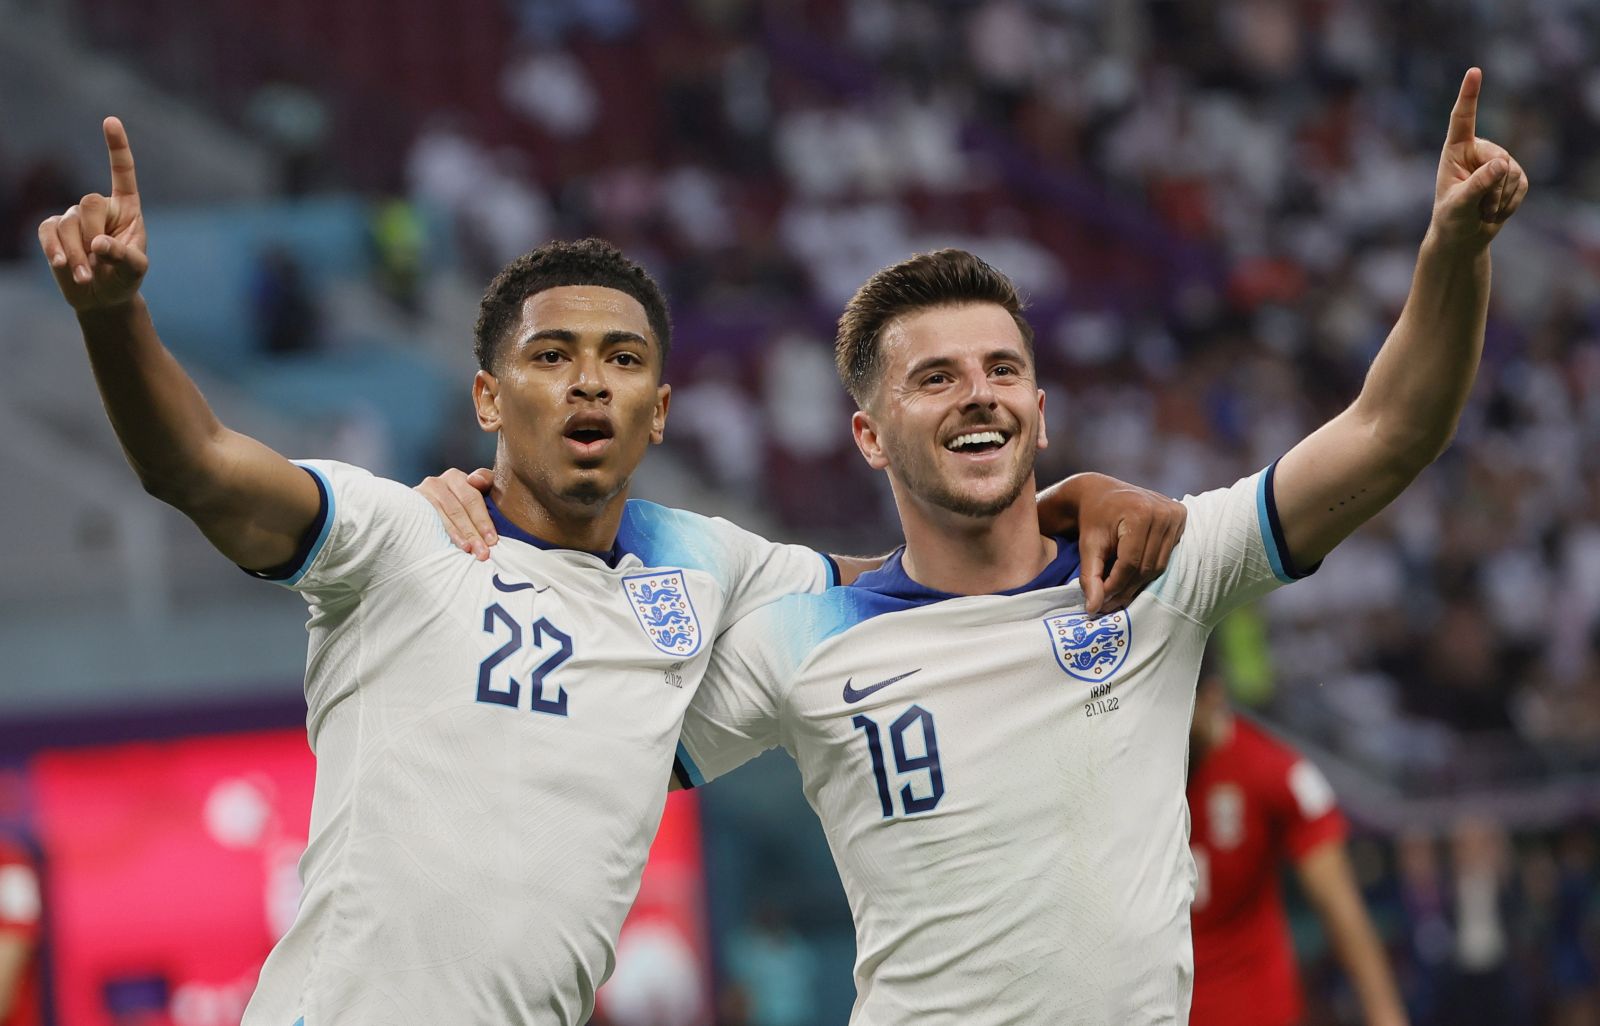 epa10317947 Jude Bellingham (L) of England celebrates with teammate Mason Mount after scoring the opening goal in the FIFA World Cup 2022 group B soccer match between England and Iran at Khalifa International Stadium in Doha, Qatar, 21 November 2022.  EPA/Ronald Wittek